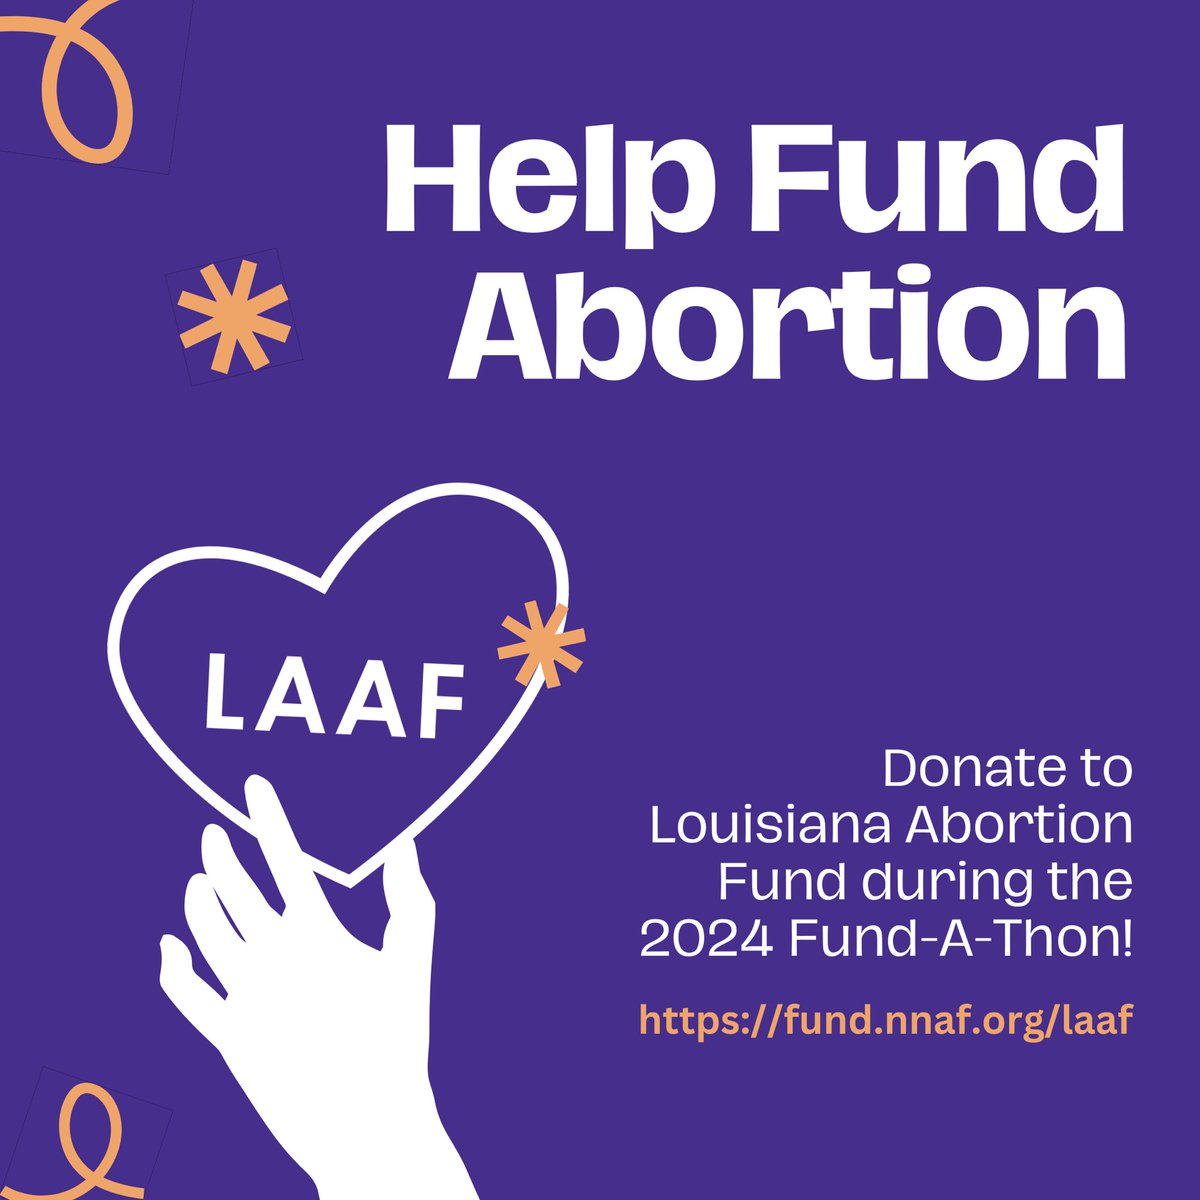 The Louisiana Abortion Fund NEEDS YOUR HELP!

📣 We’ve kicked off our annual Fund-a-Thon! 

Sign up to become a fundraiser or donate! 👉 fund.nnaf.org/laaf #Fthon24